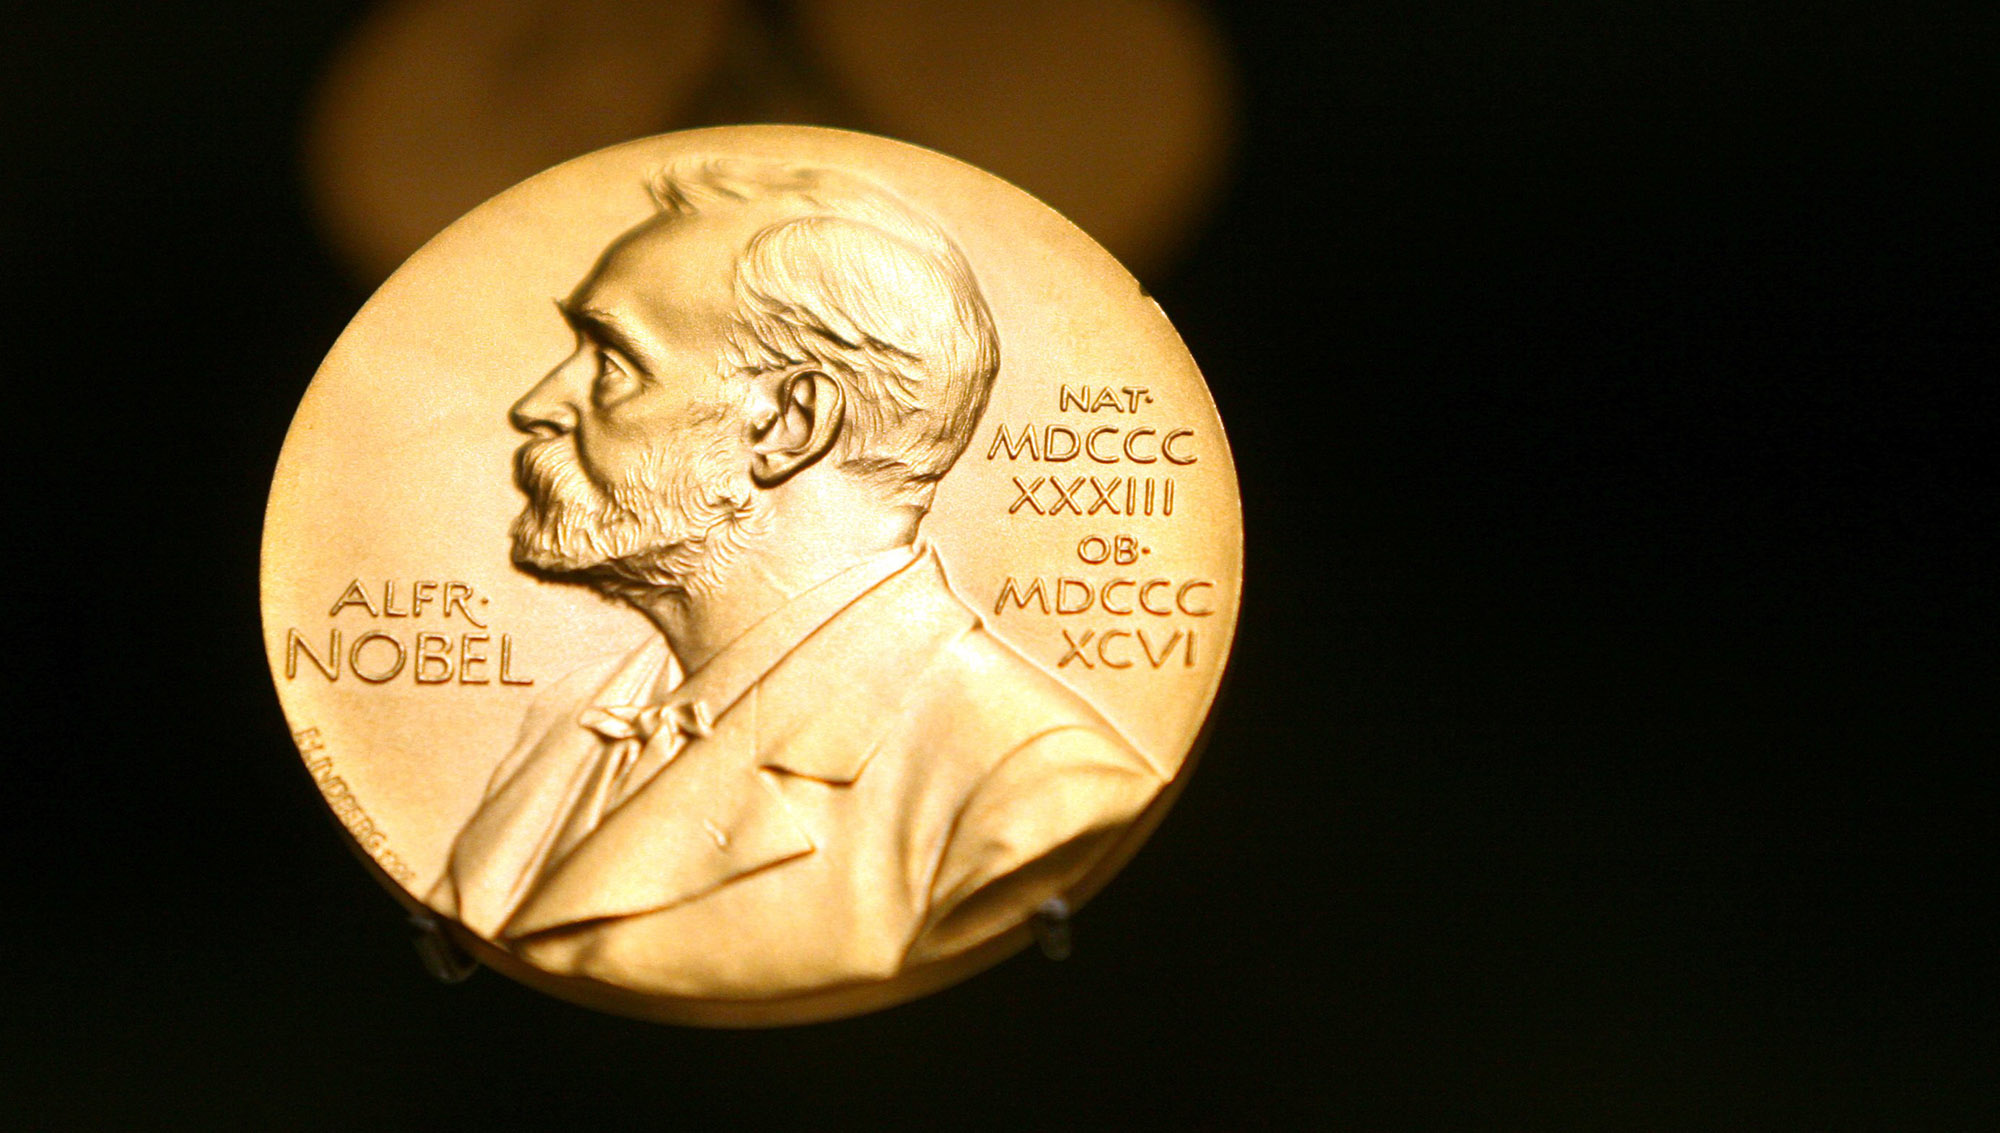 You are currently viewing Sexual violence campaigners win Nobel Peace Prize